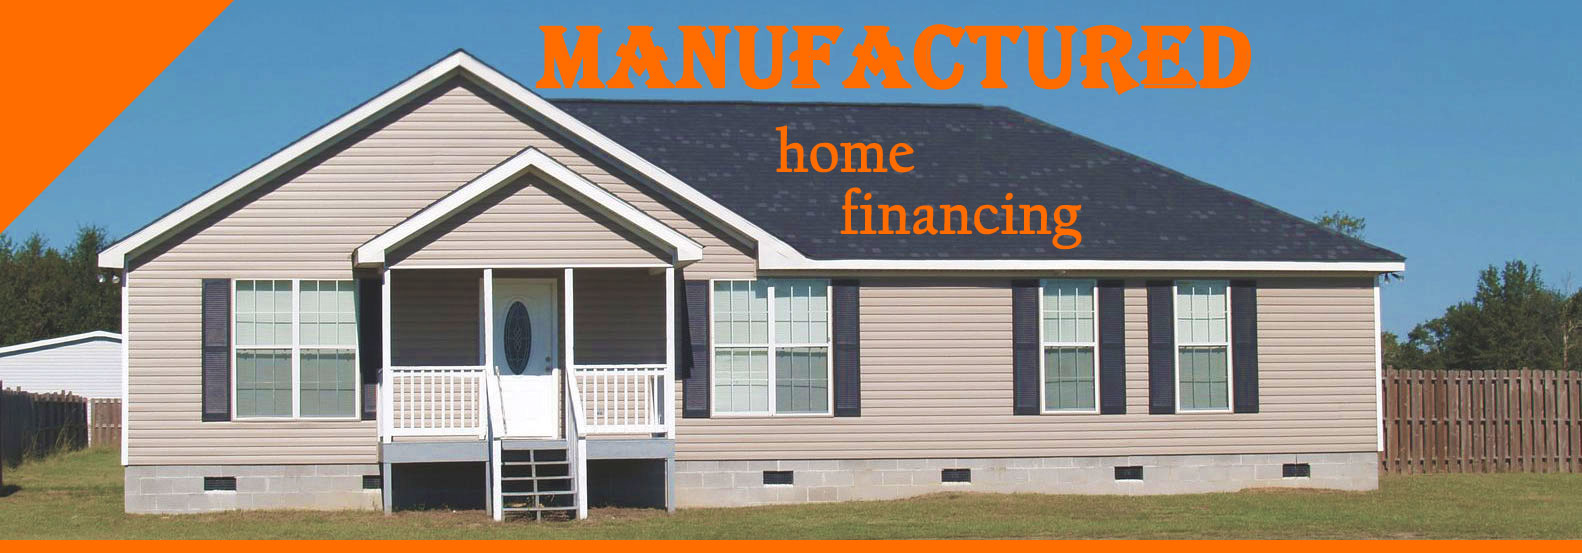 manufactured home loan requirements